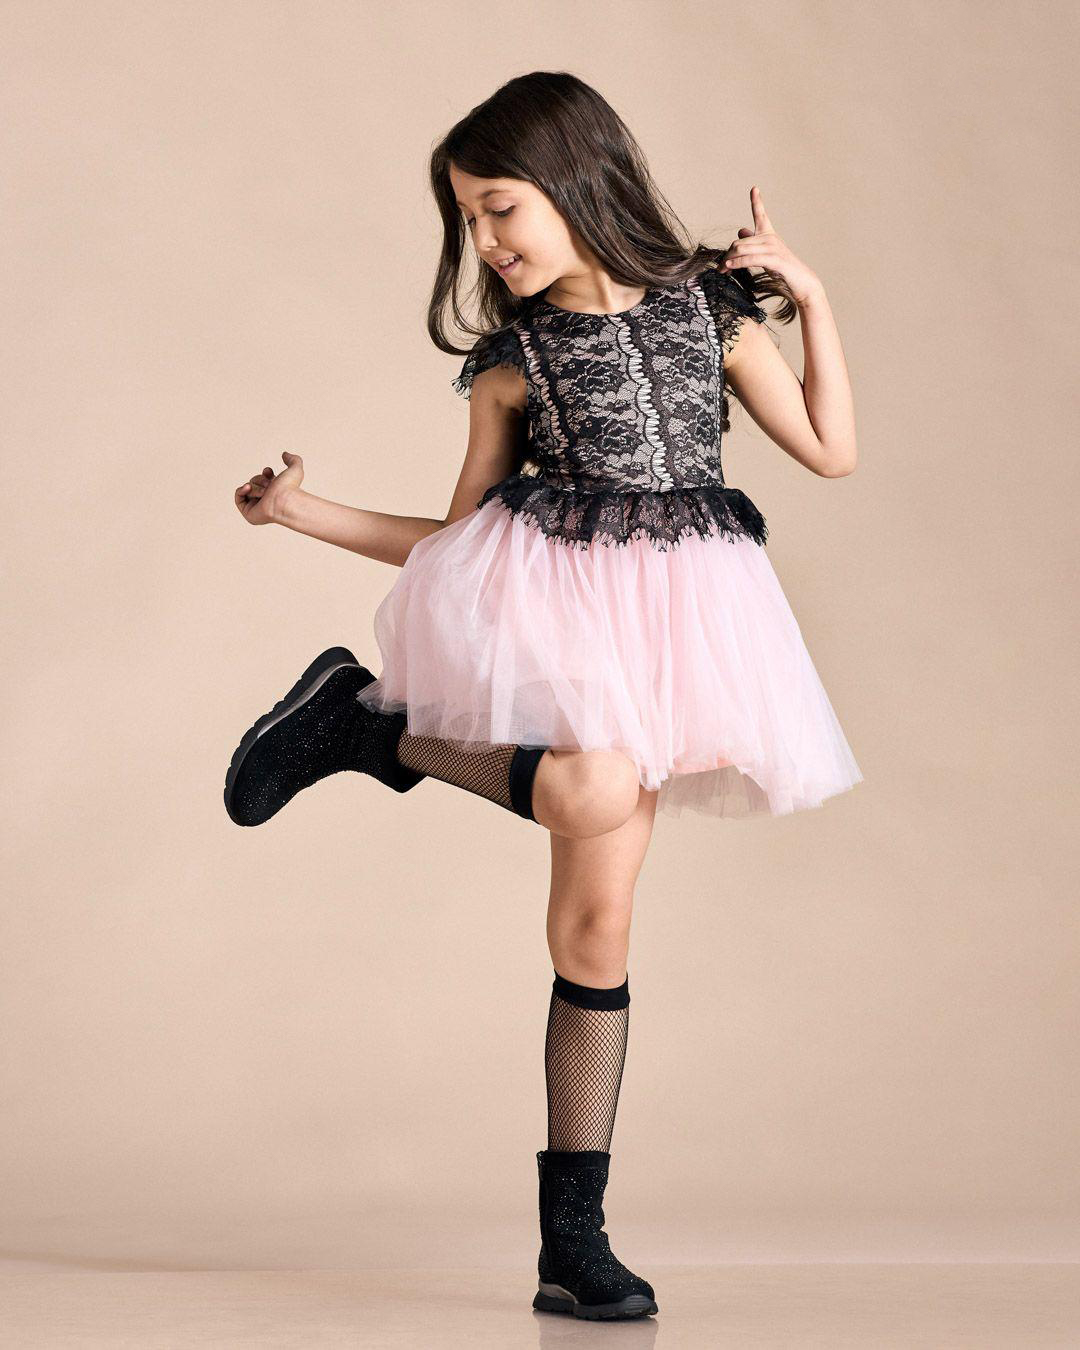 Little girl wearing a pink skirt and black t-shirt striking a pose